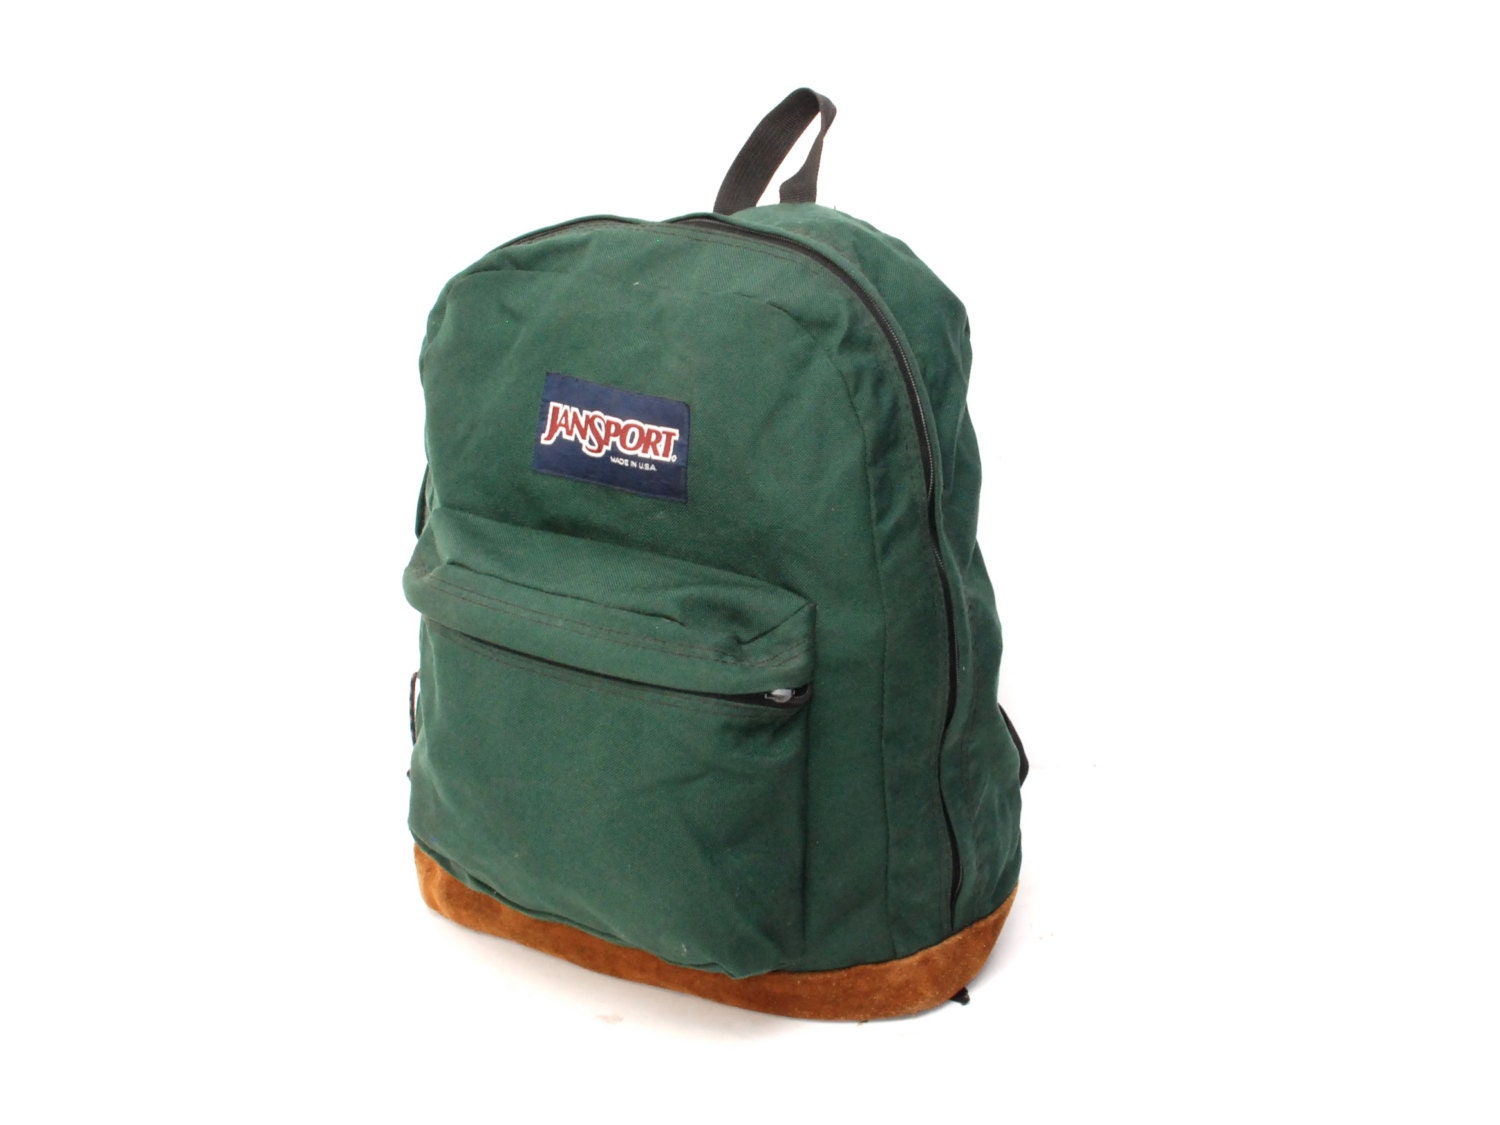 JANSPORT green canvas 80s 90s BACKPACK by 20twentyvintage on Etsy